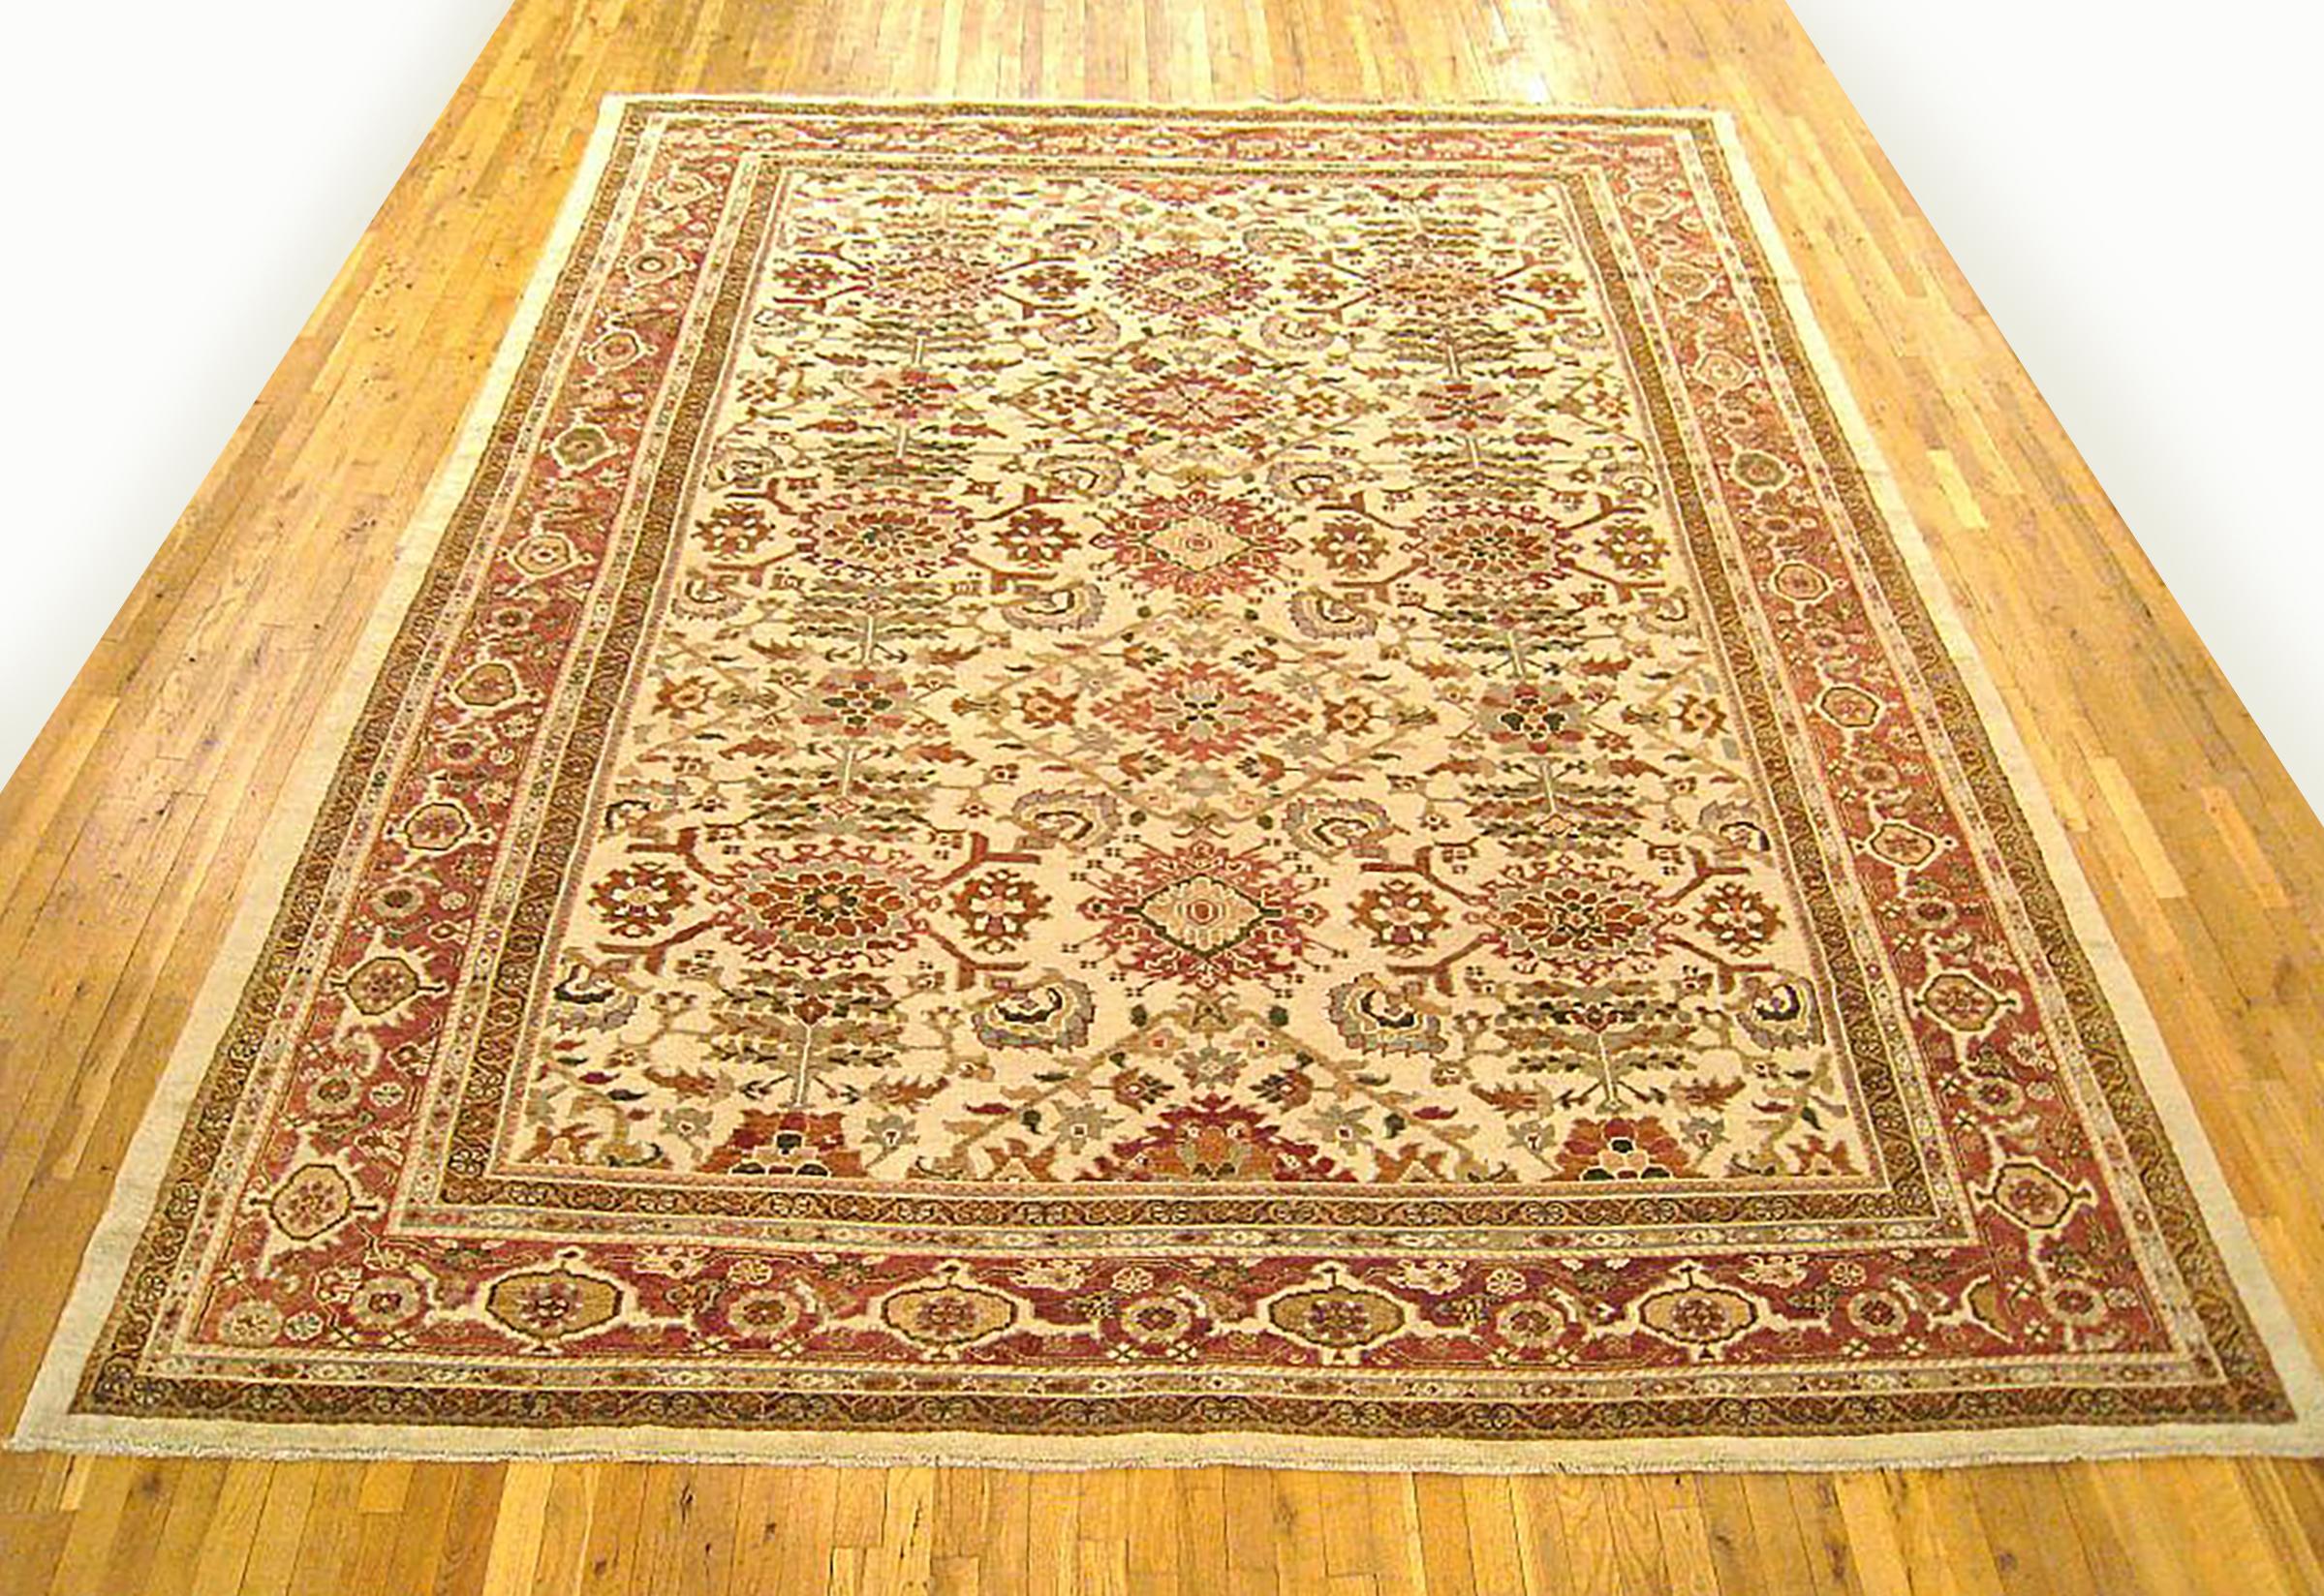 Antique Persian Sultanabad rug, Roomrge size, circa 1920

A one-of-a-kind antique Persian Sultanabad oriental carpet with a thick and lustrous wool pile, knotted by hand, with soft touch and great resistance to wear. This carpet features a repeating